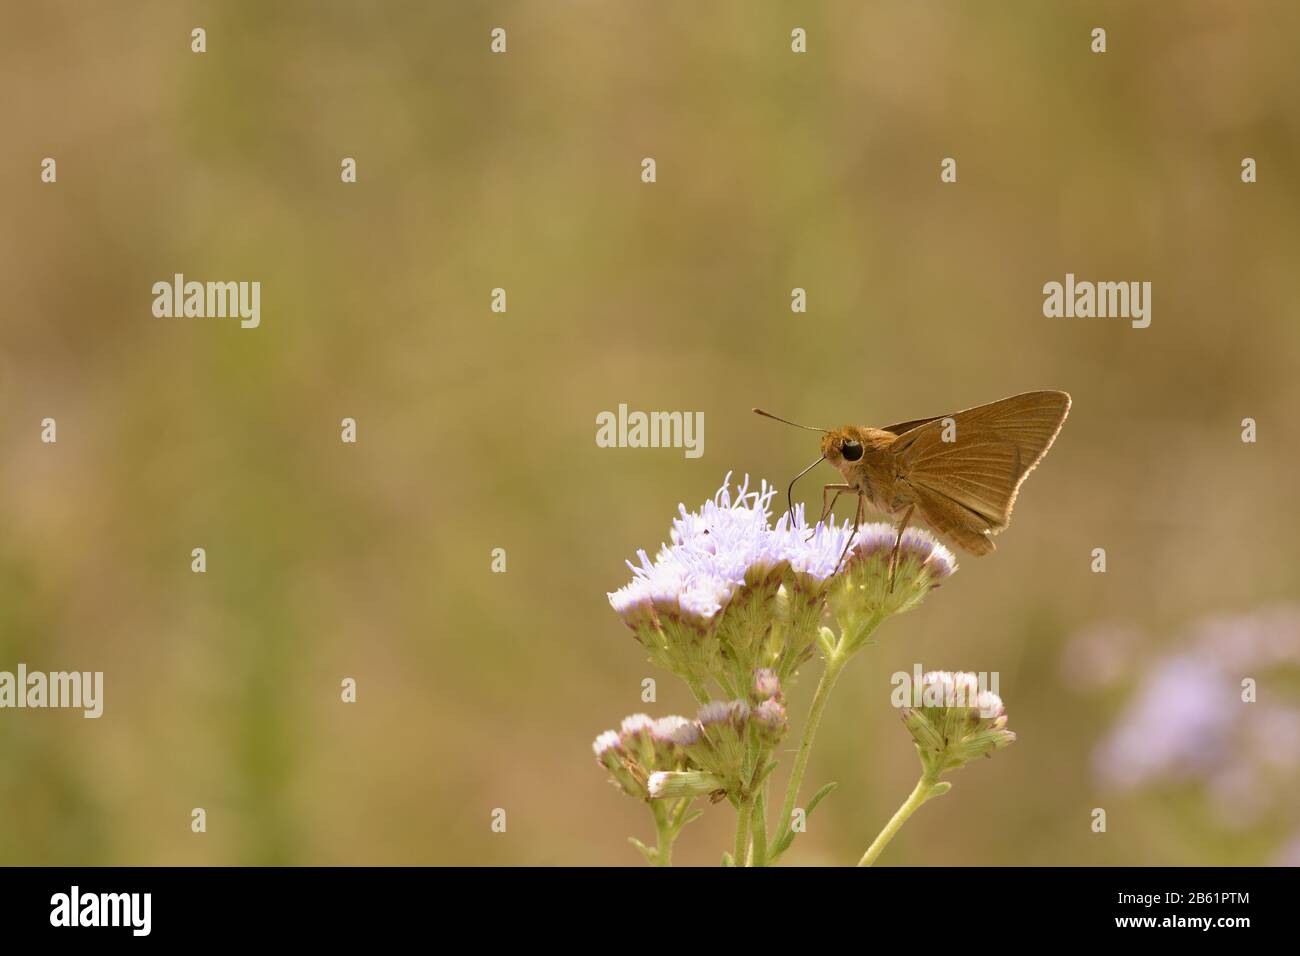 brown butterfly pollinating a flower Stock Photo